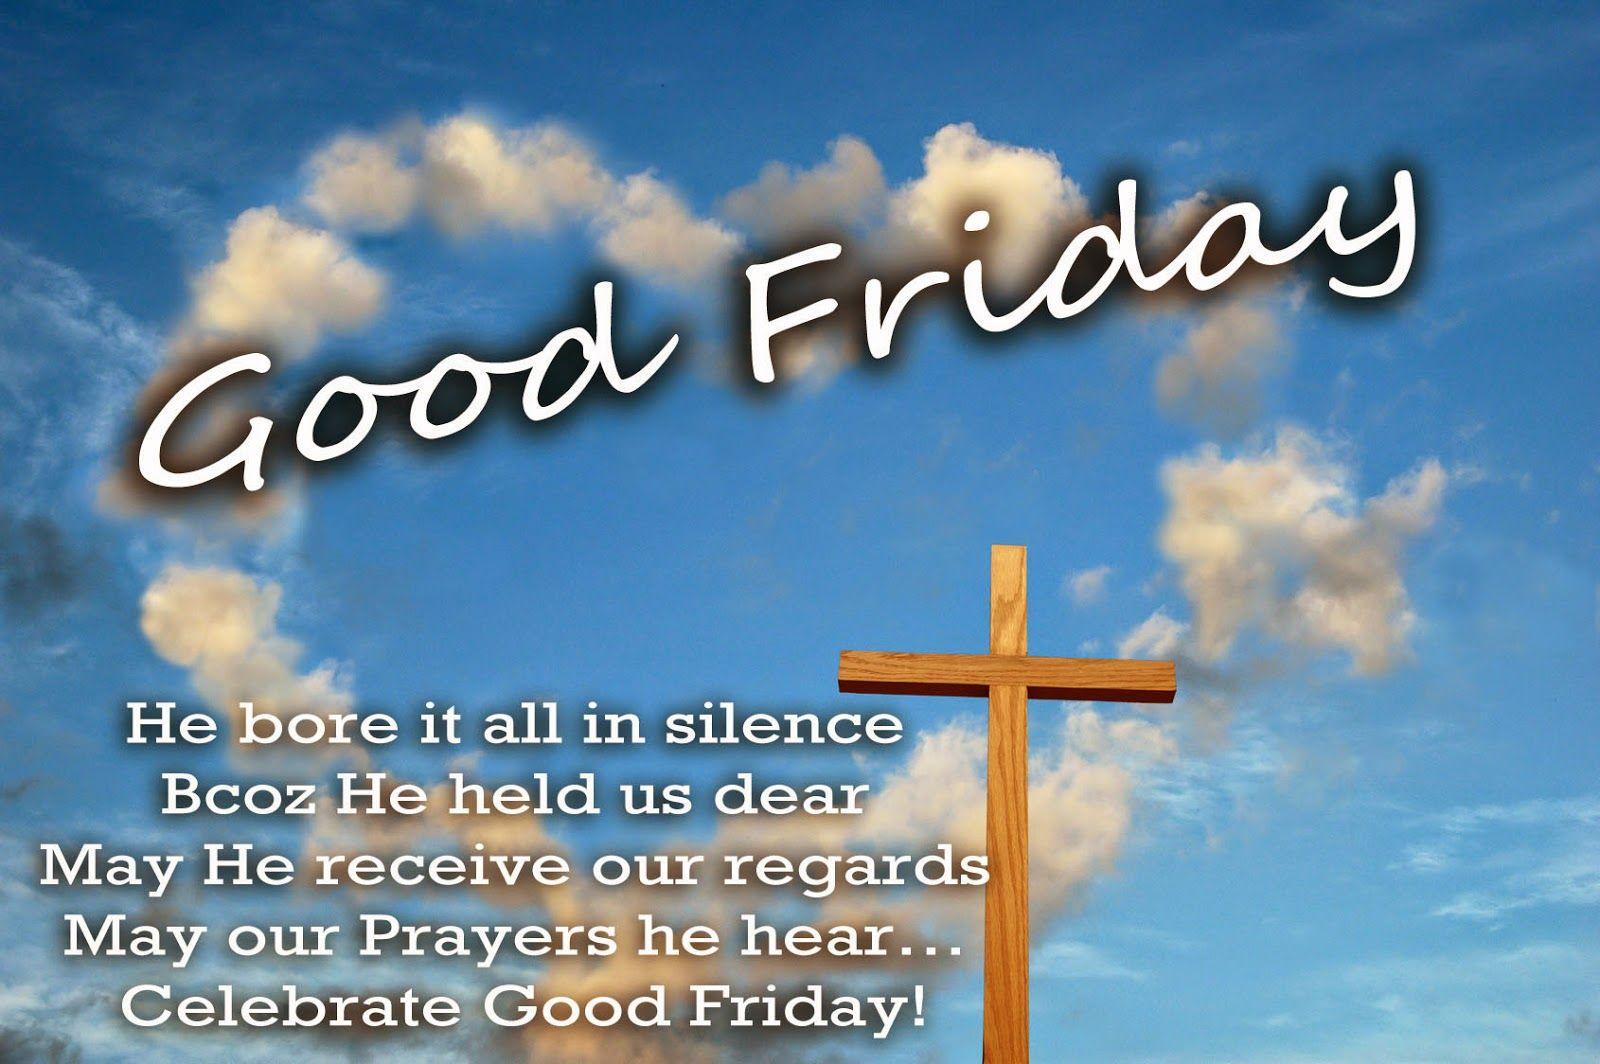 Happy Good Friday Quotes Image for Instagram Facebook 2018